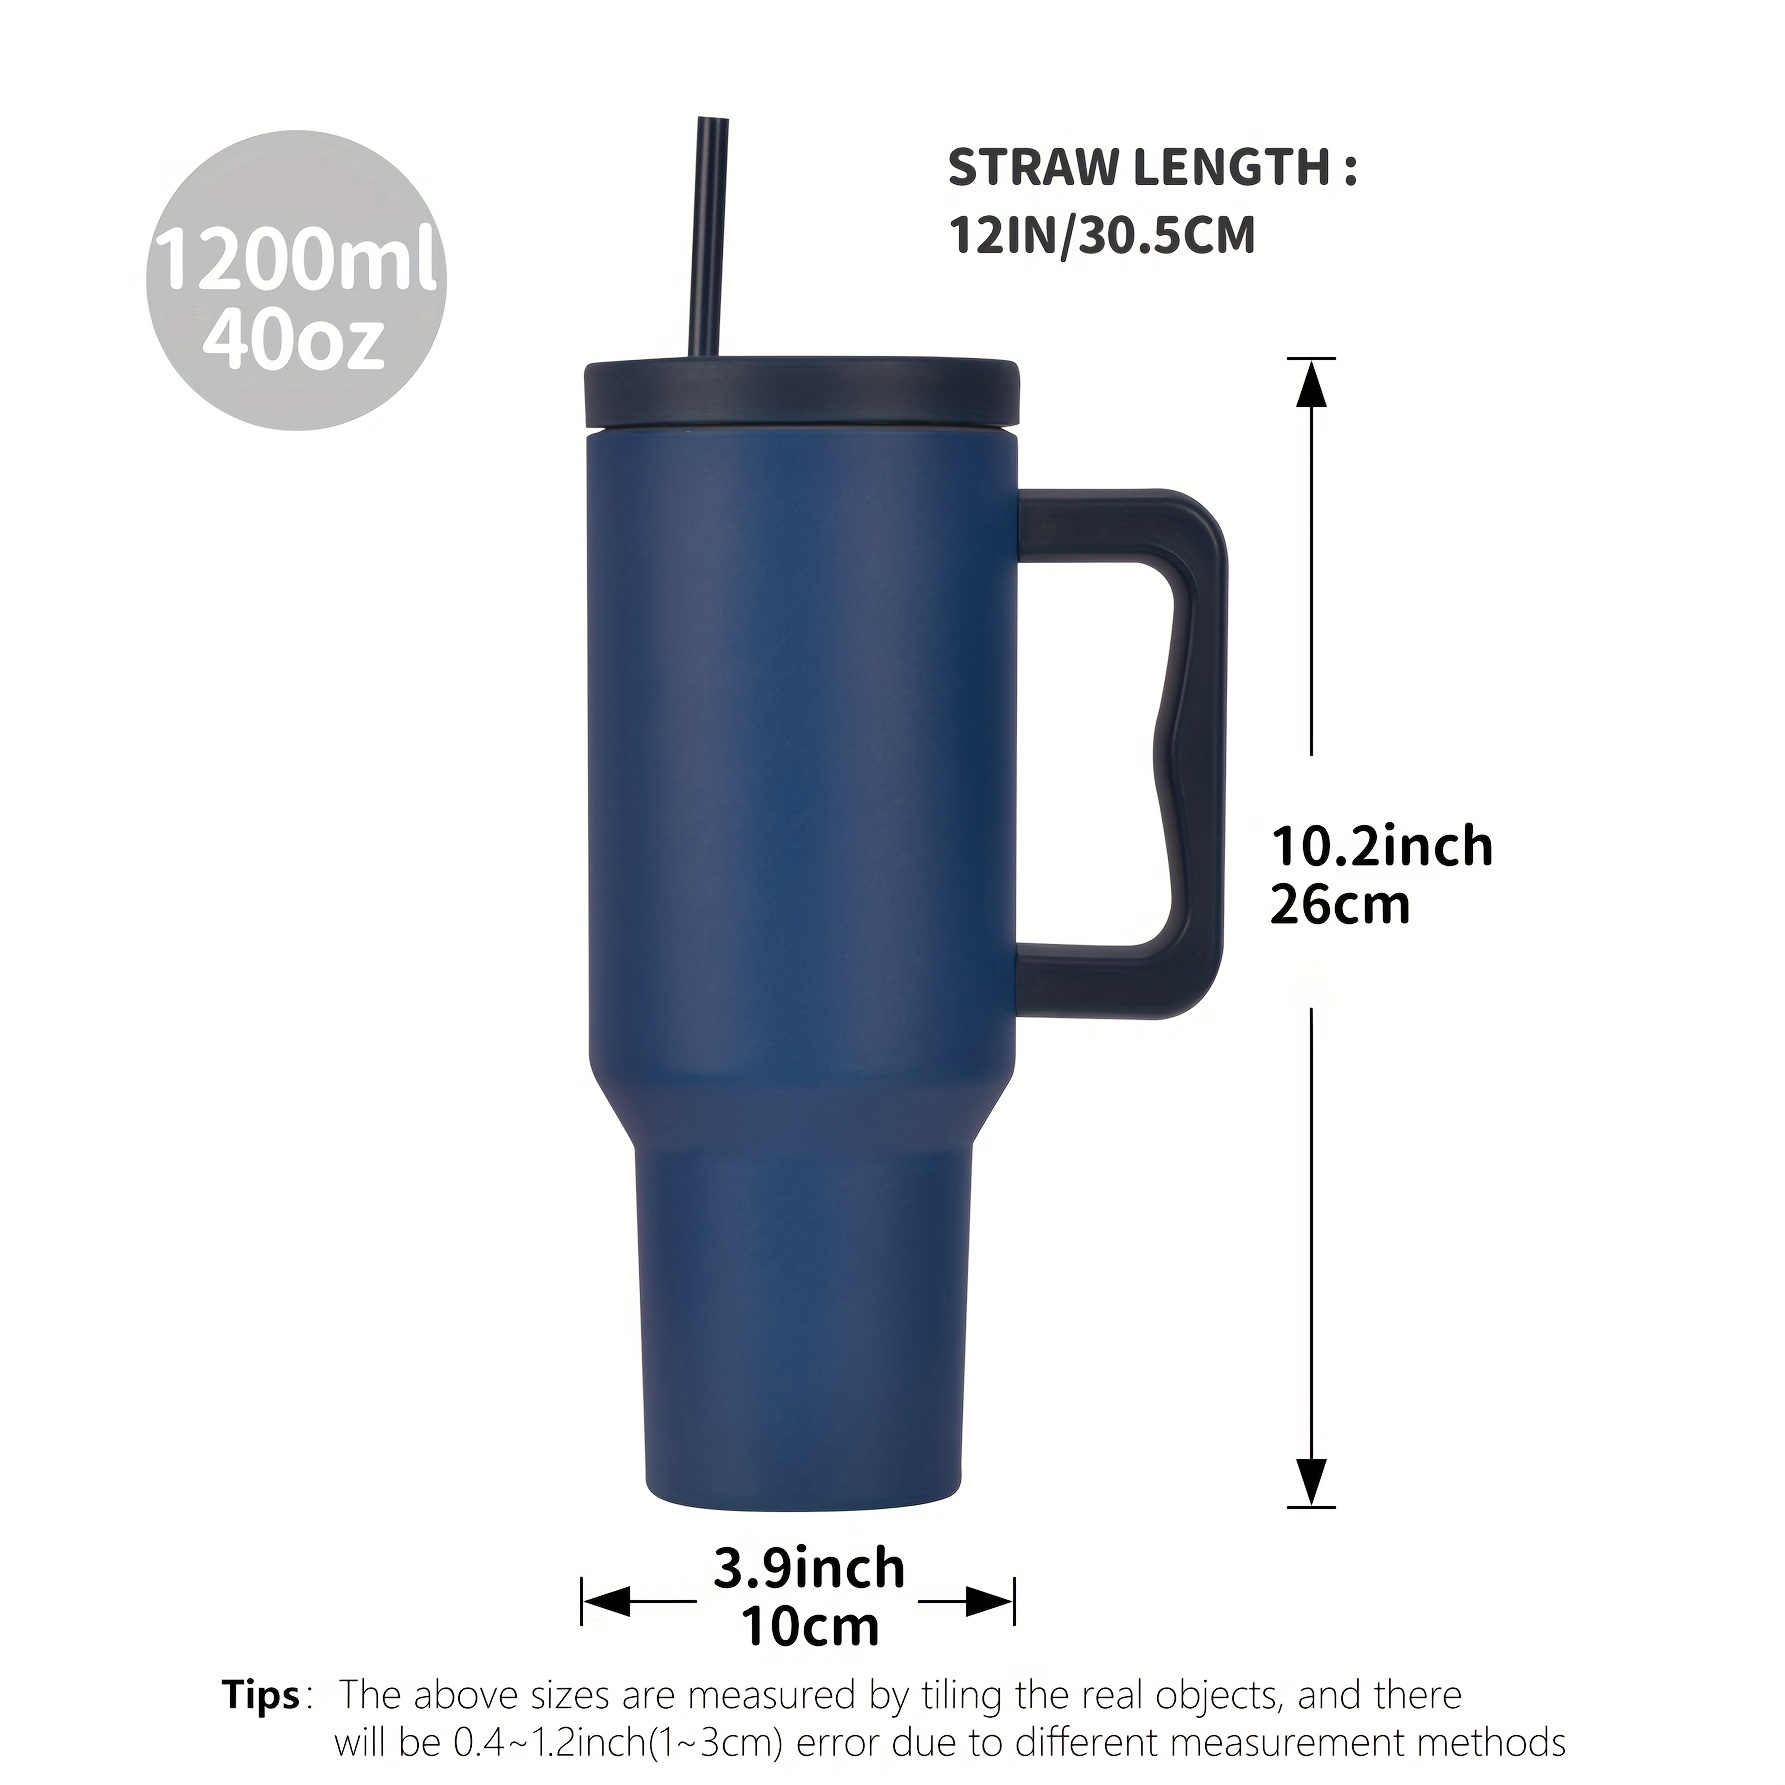 Straw Cover Cap Straw Tip Covers Cup Straw Cover for Camping Outdoor Travel Black, Men's, Size: As Description